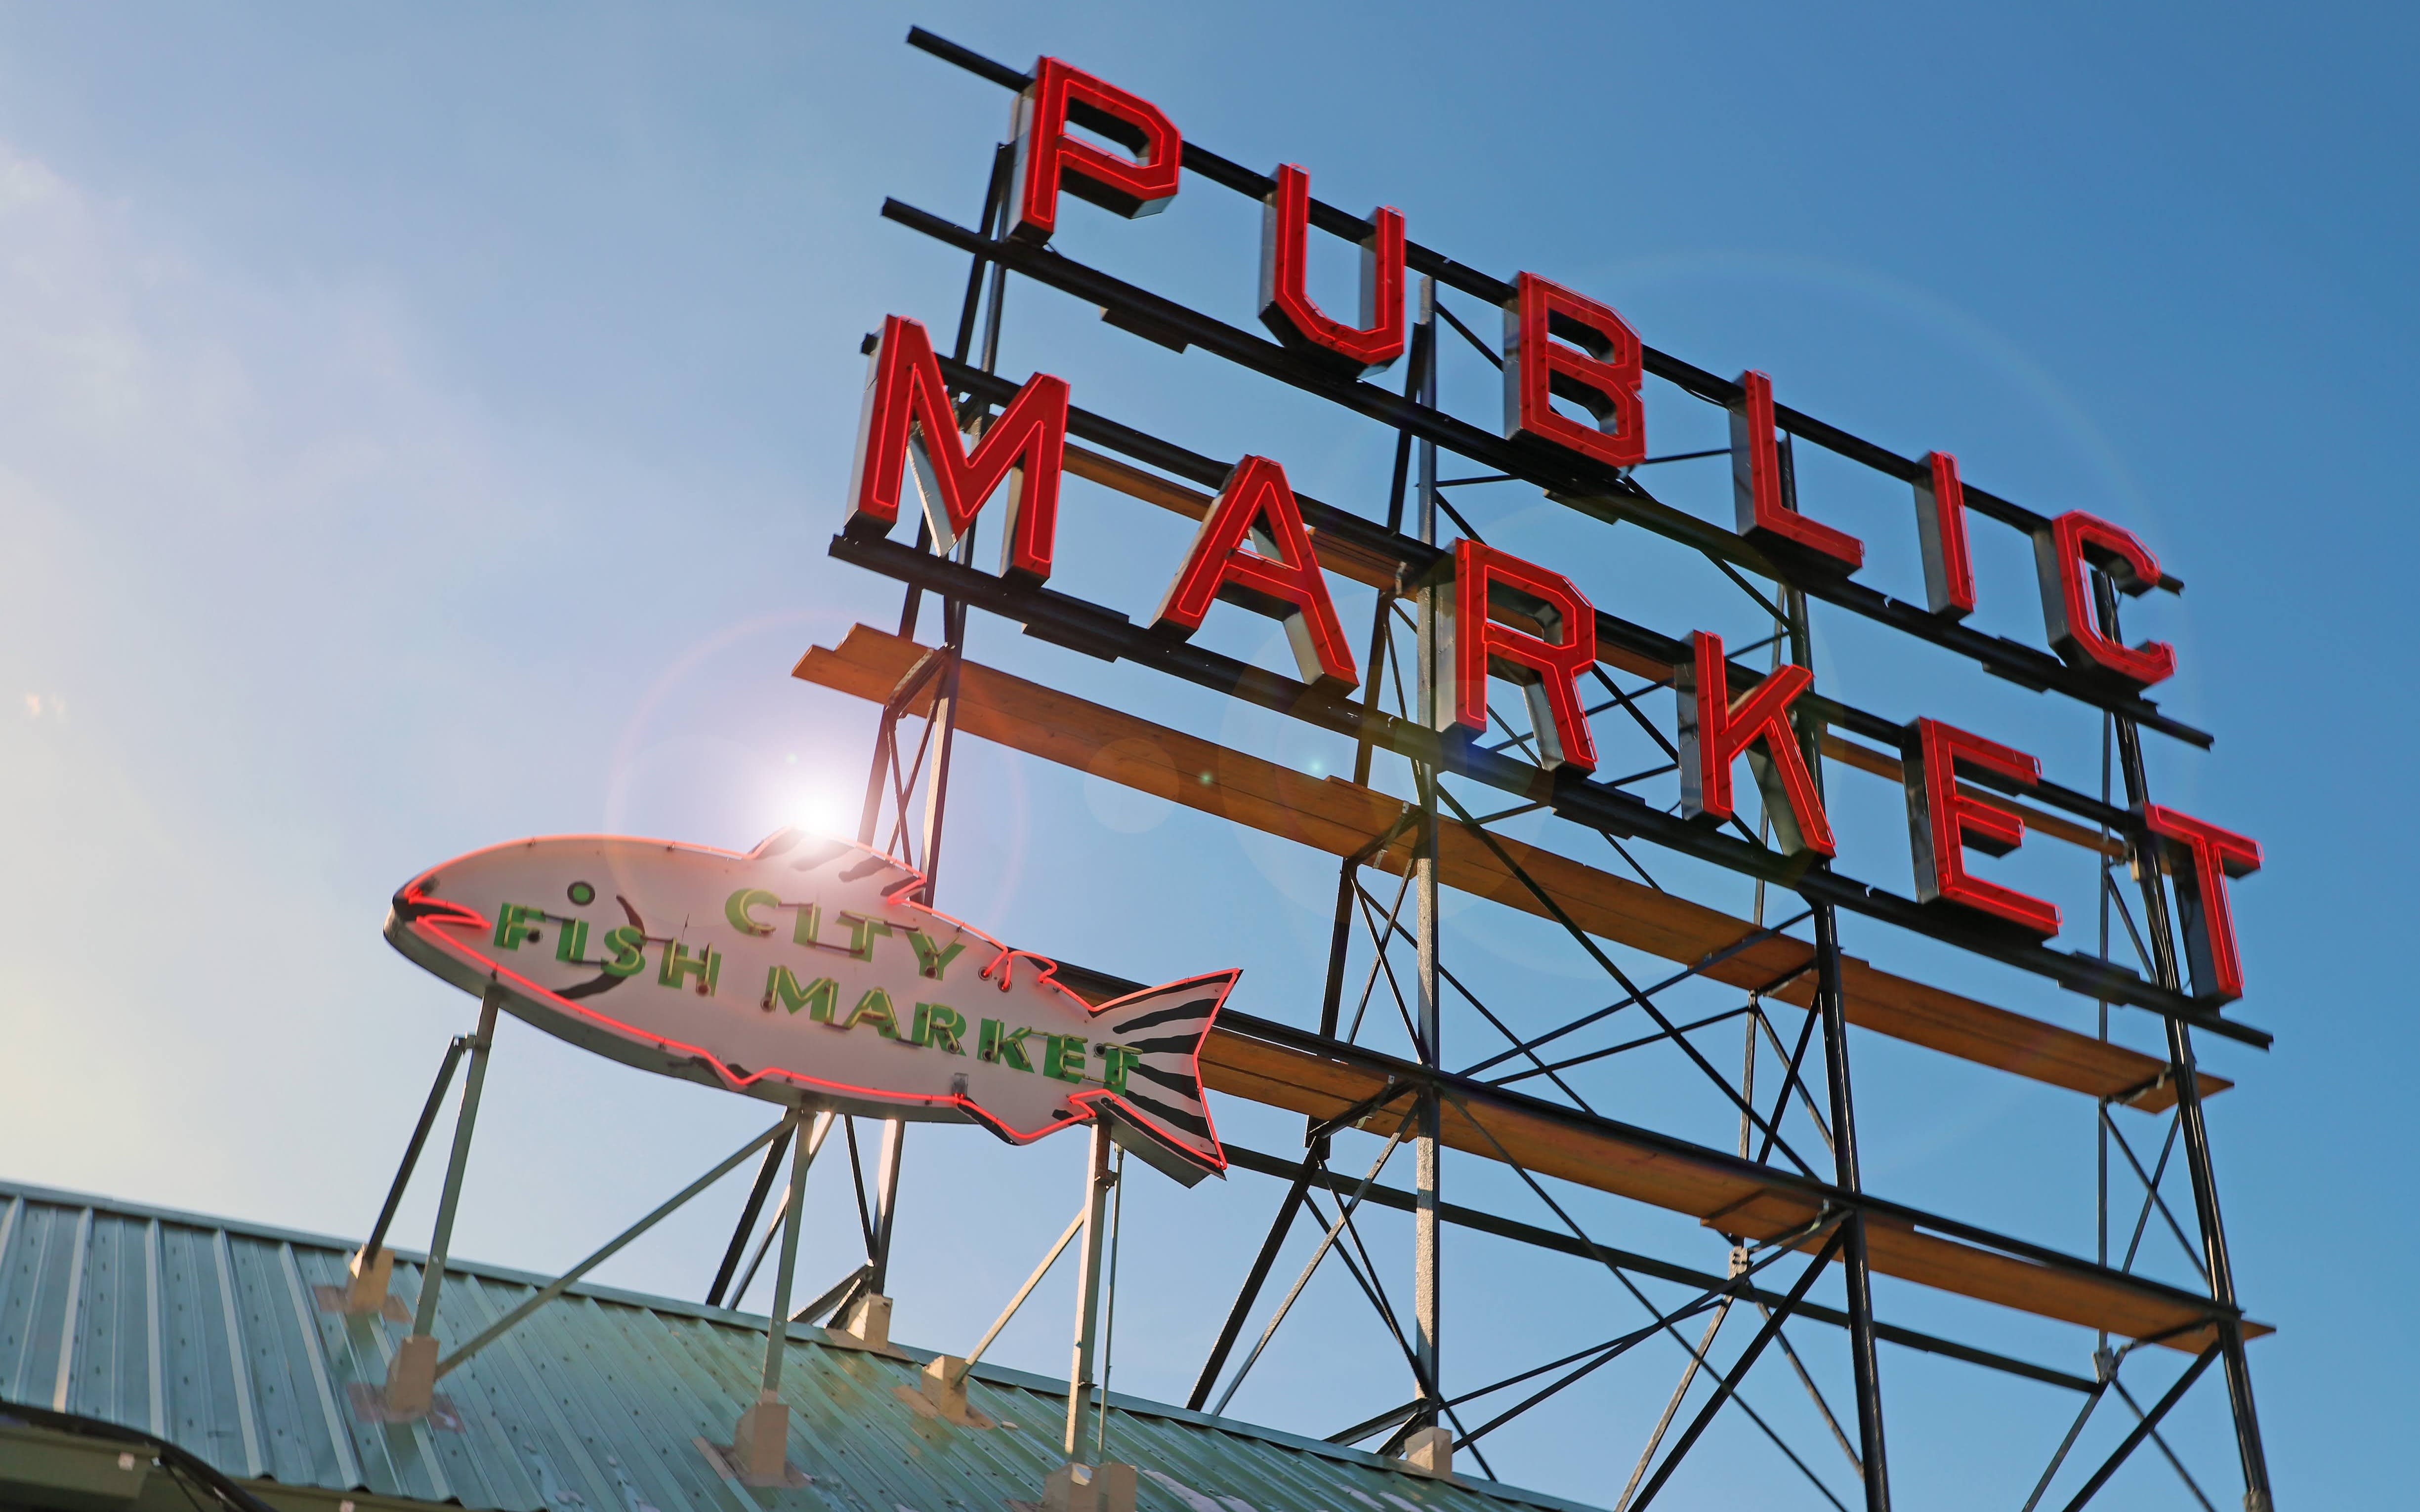 An image of the City Market in Seattle